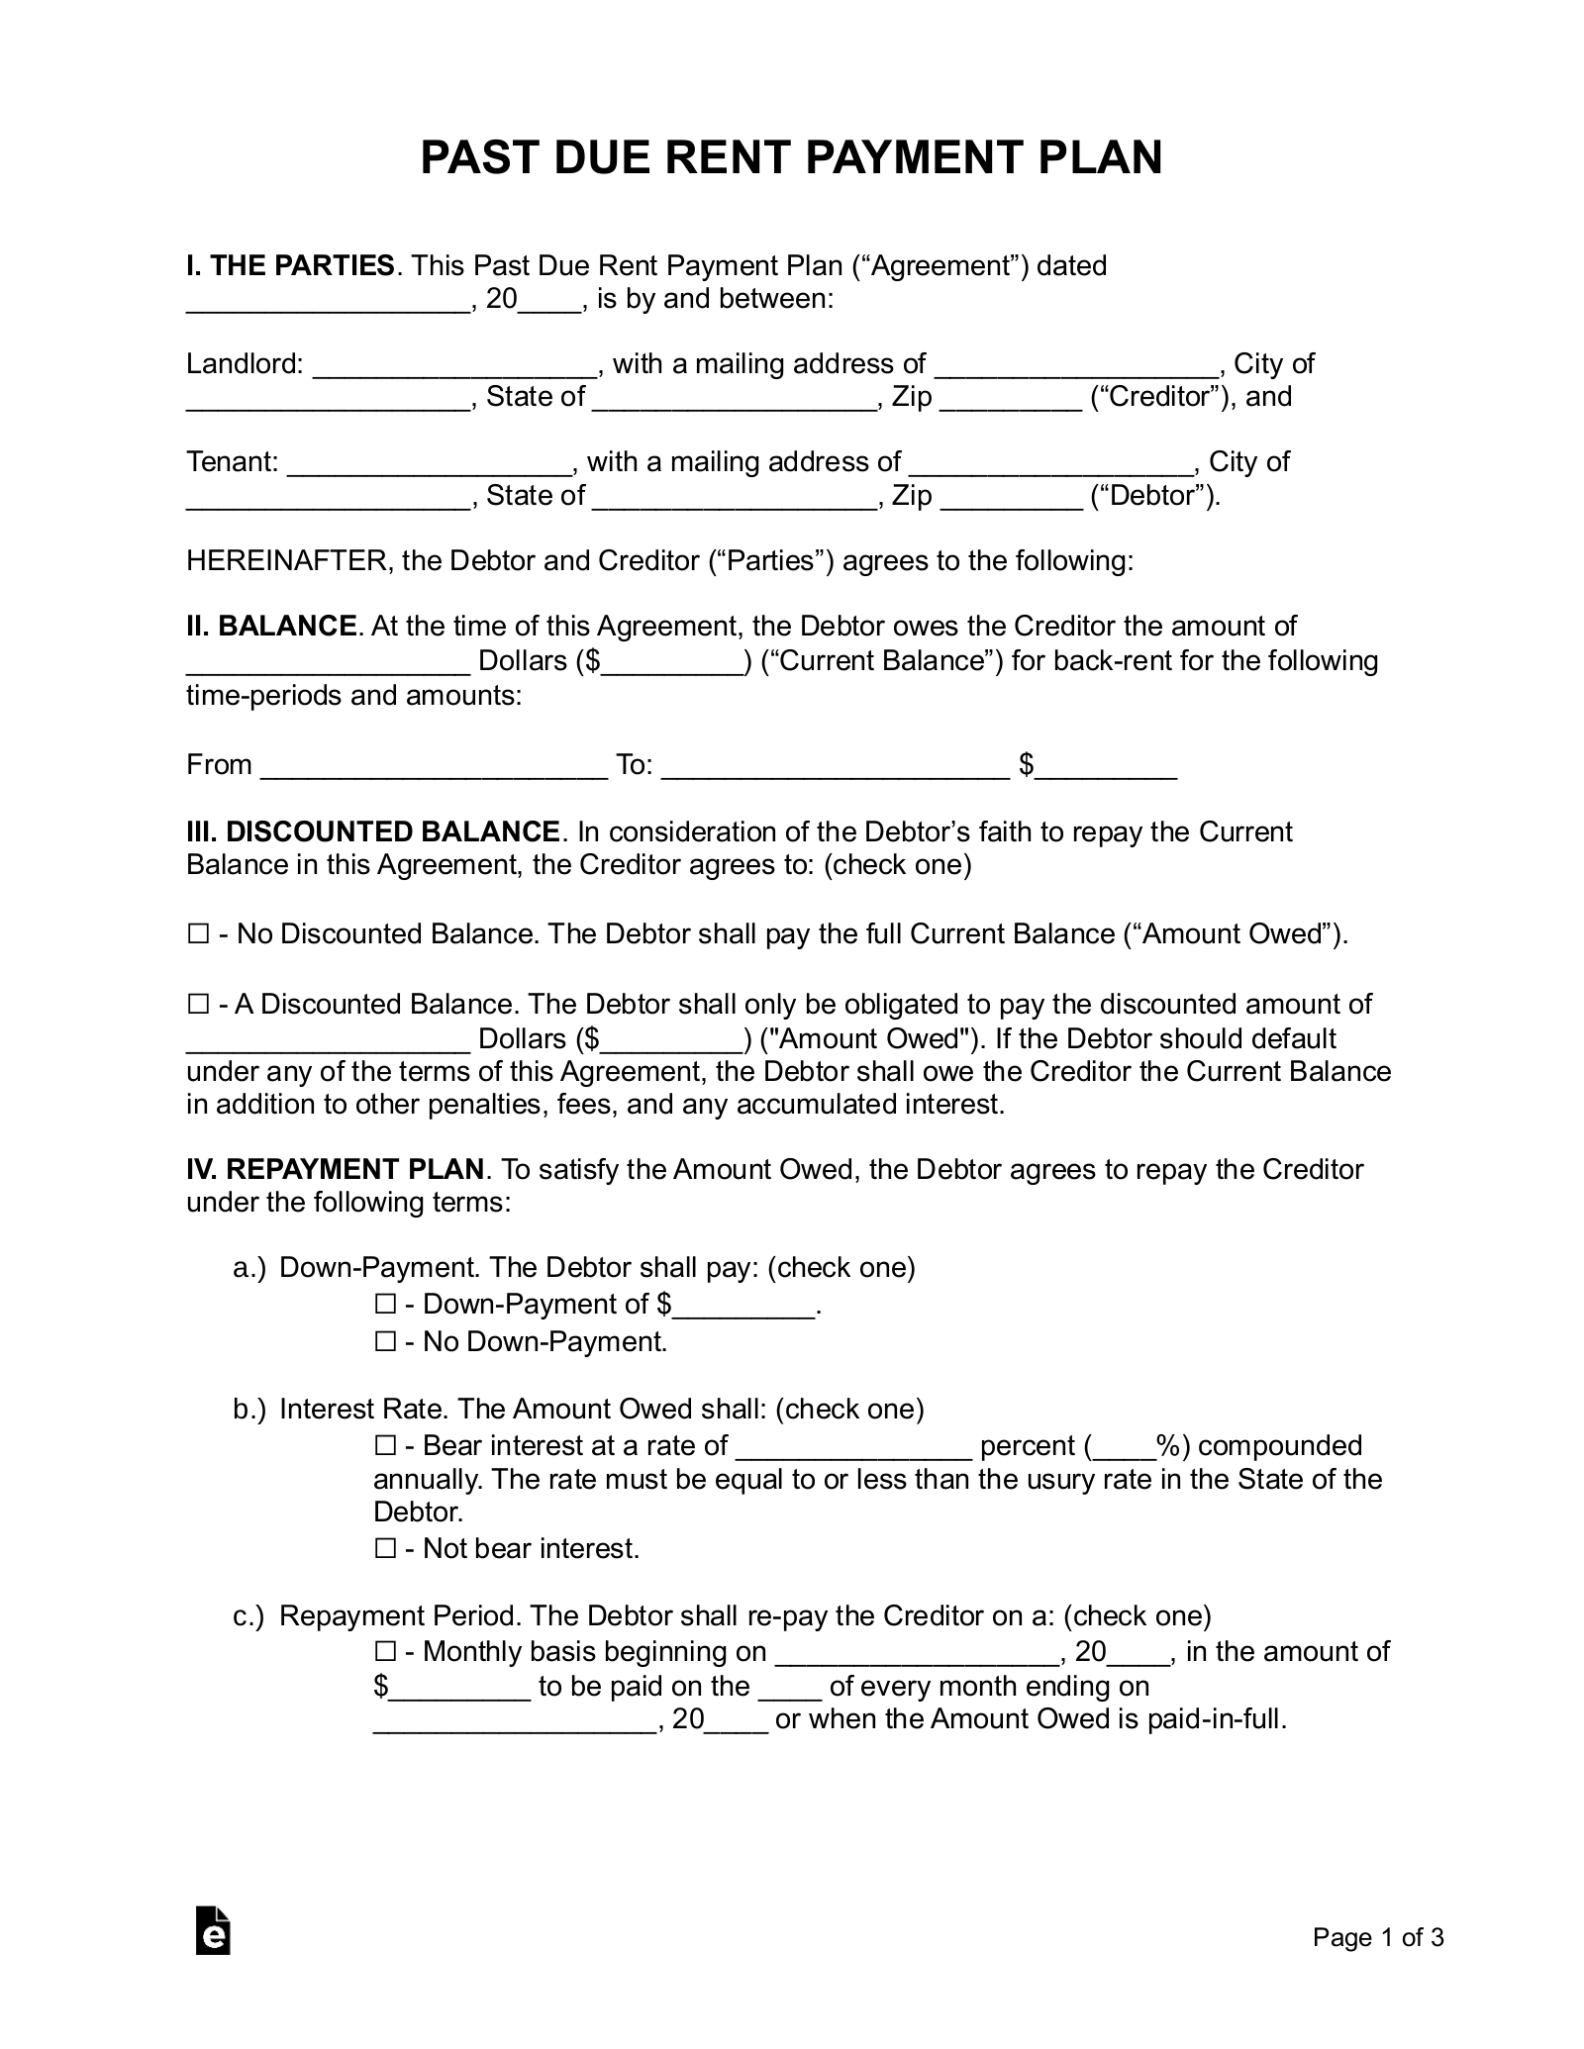 Past Due Rent Payment Plan Agreement - Eforms Throughout Notarized Payment Agreement Template